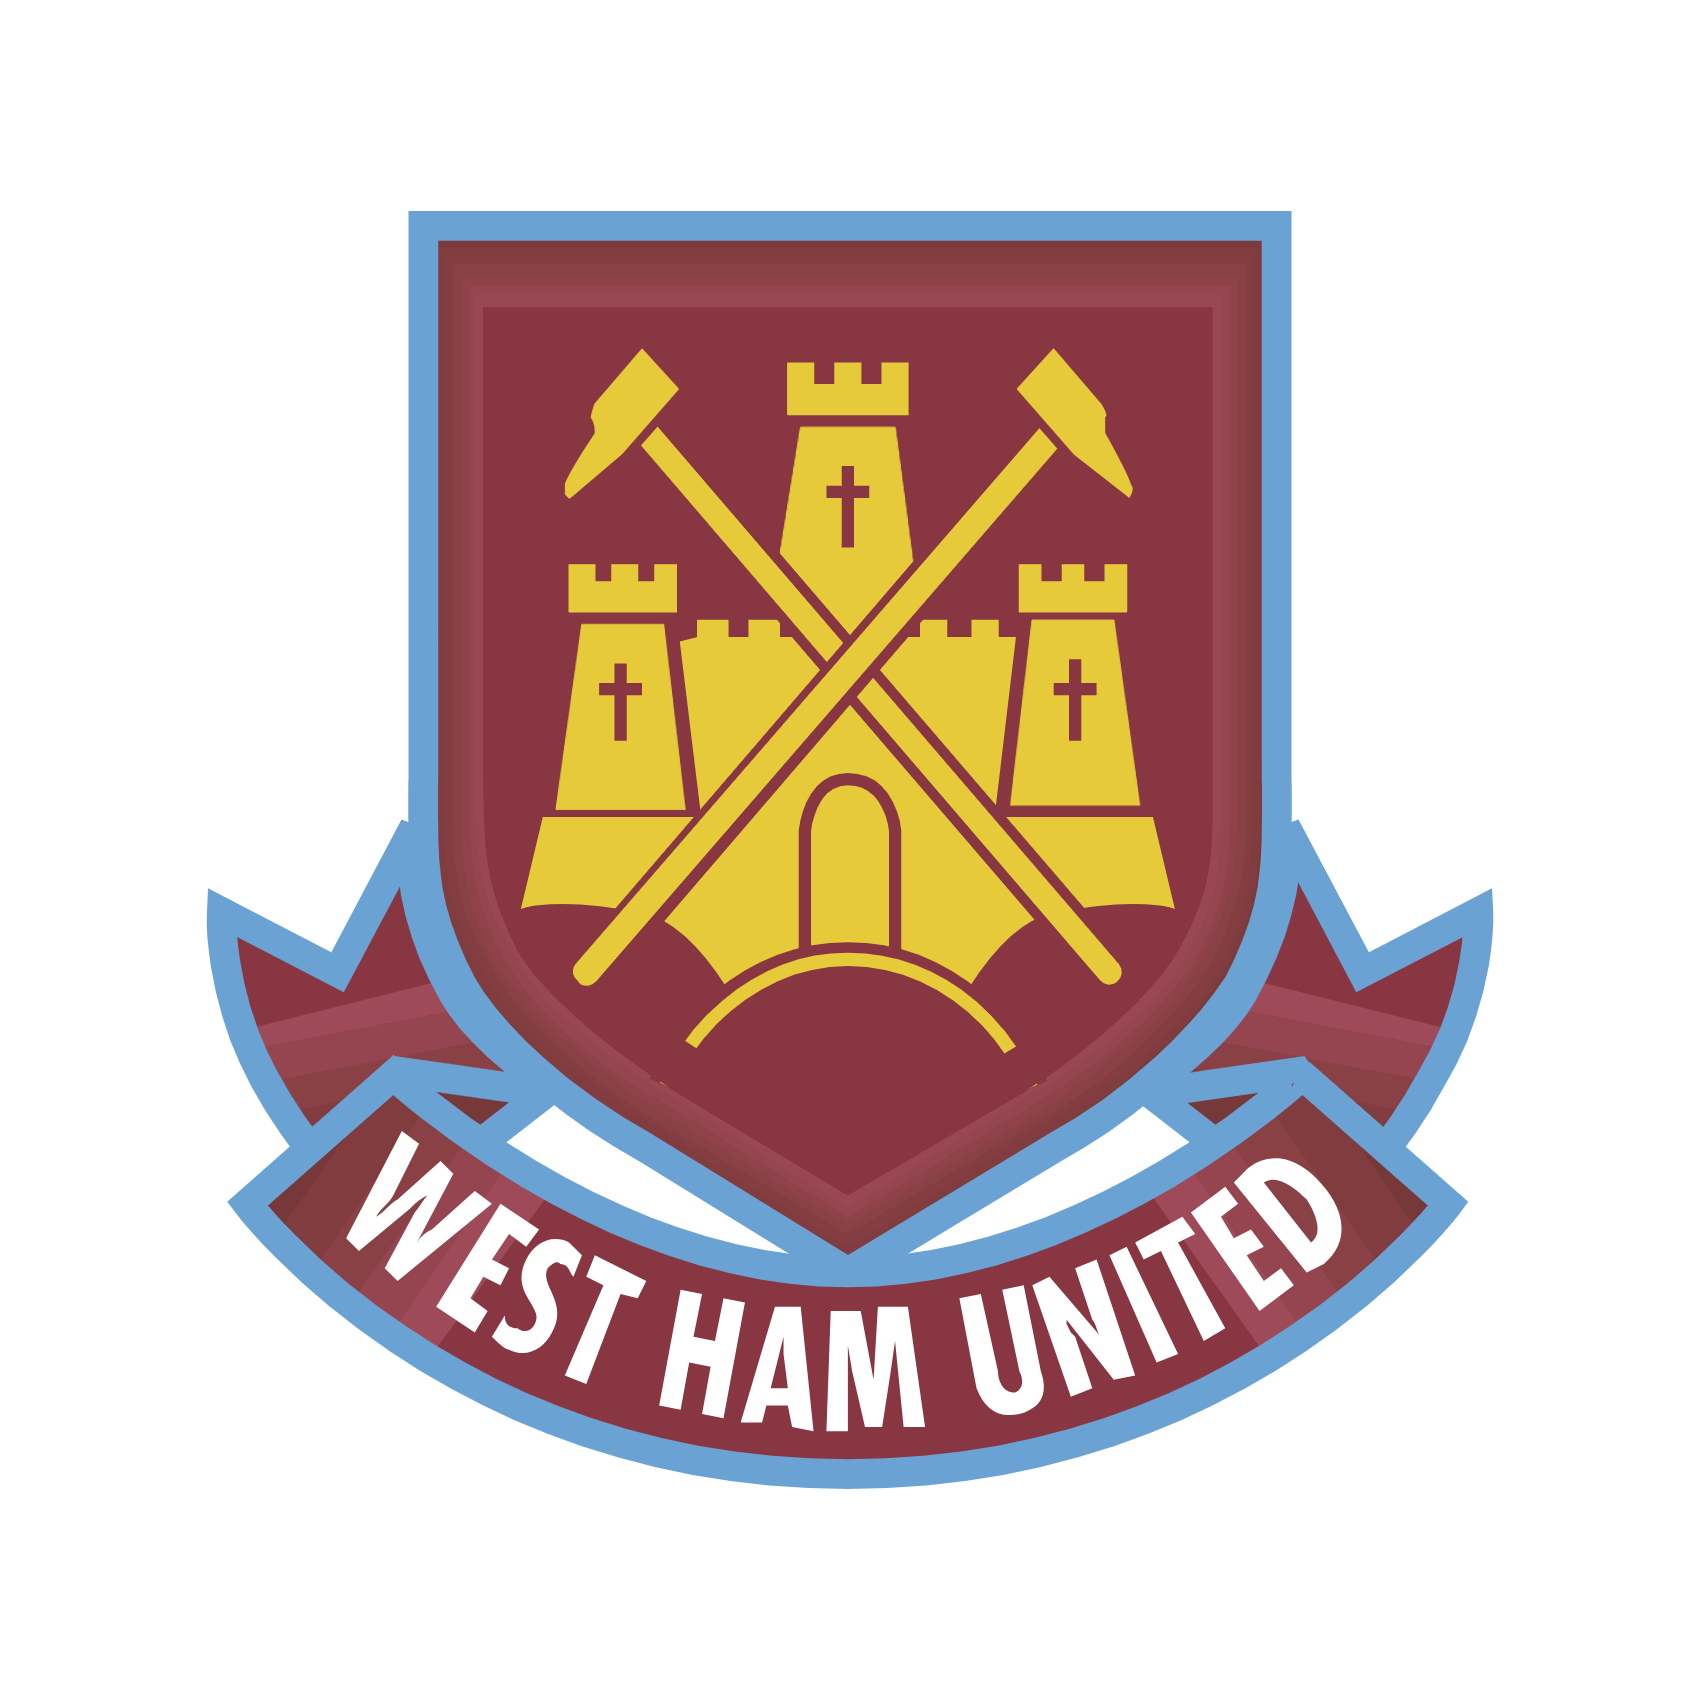 West Ham United - The Ironclad Spirit of Football Excellence